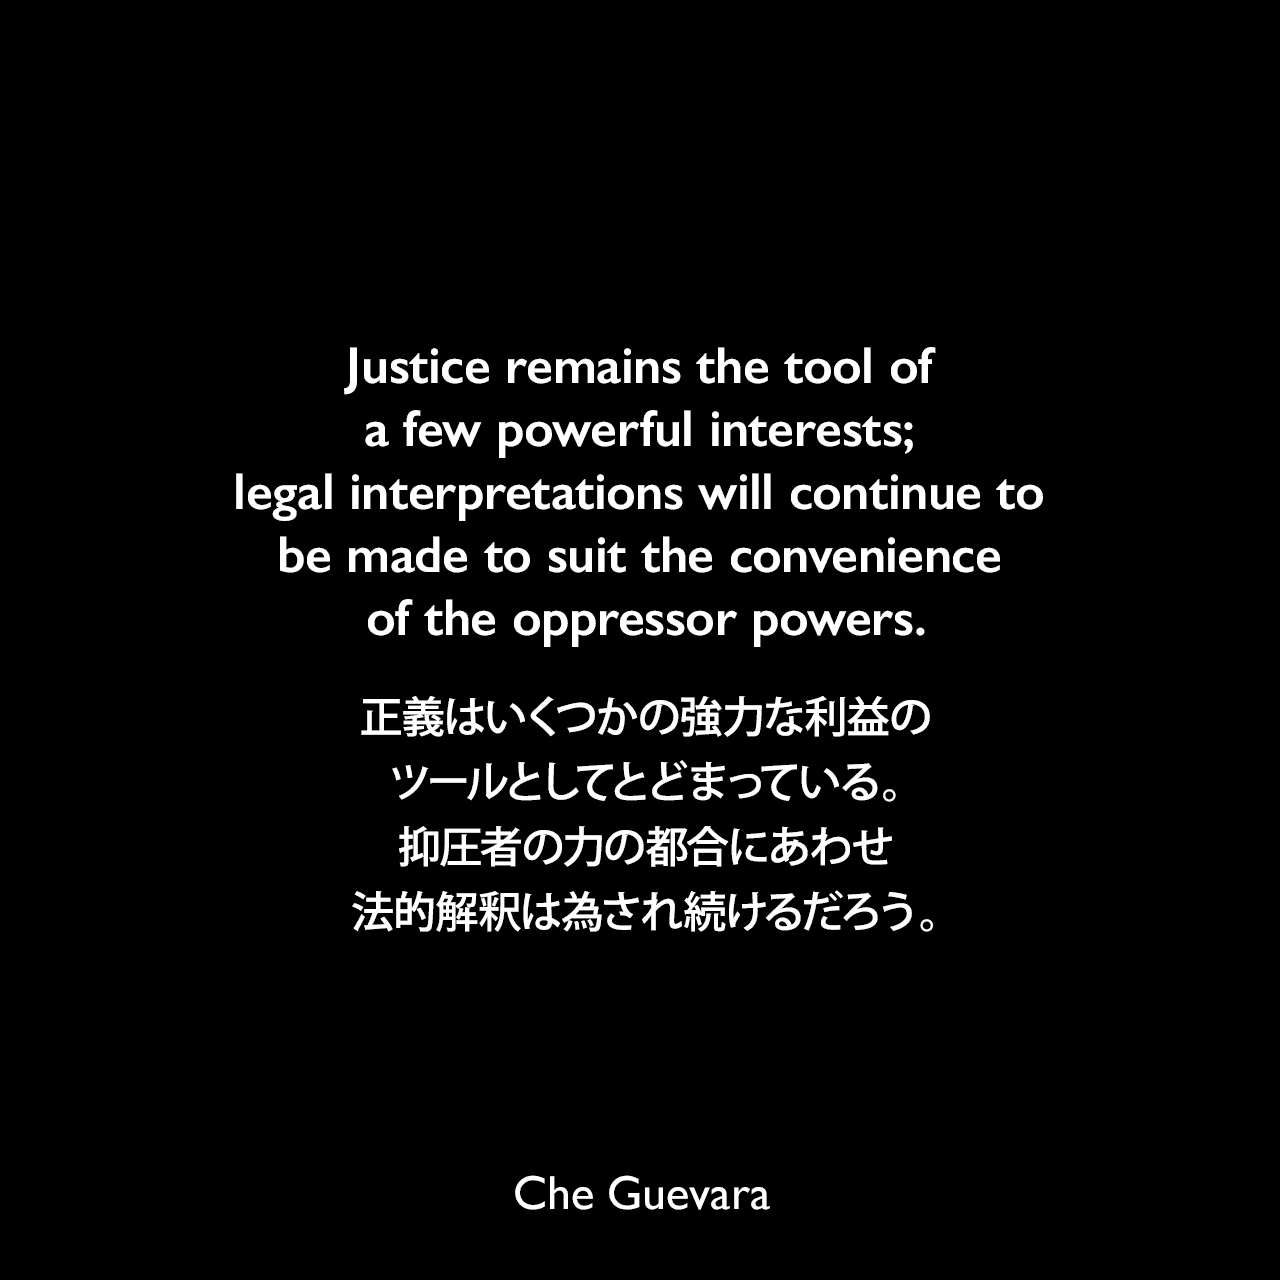 Justice remains the tool of a few powerful interests; legal interpretations will continue to be made to suit the convenience of the oppressor powers.正義はいくつかの強力な利益のツールとしてとどまっている。抑圧者の力の都合にあわせ法的解釈は為され続けるだろう。- 1964年3月25日ジュネーブでの国連会議で発表されたスピーチChe Guevara